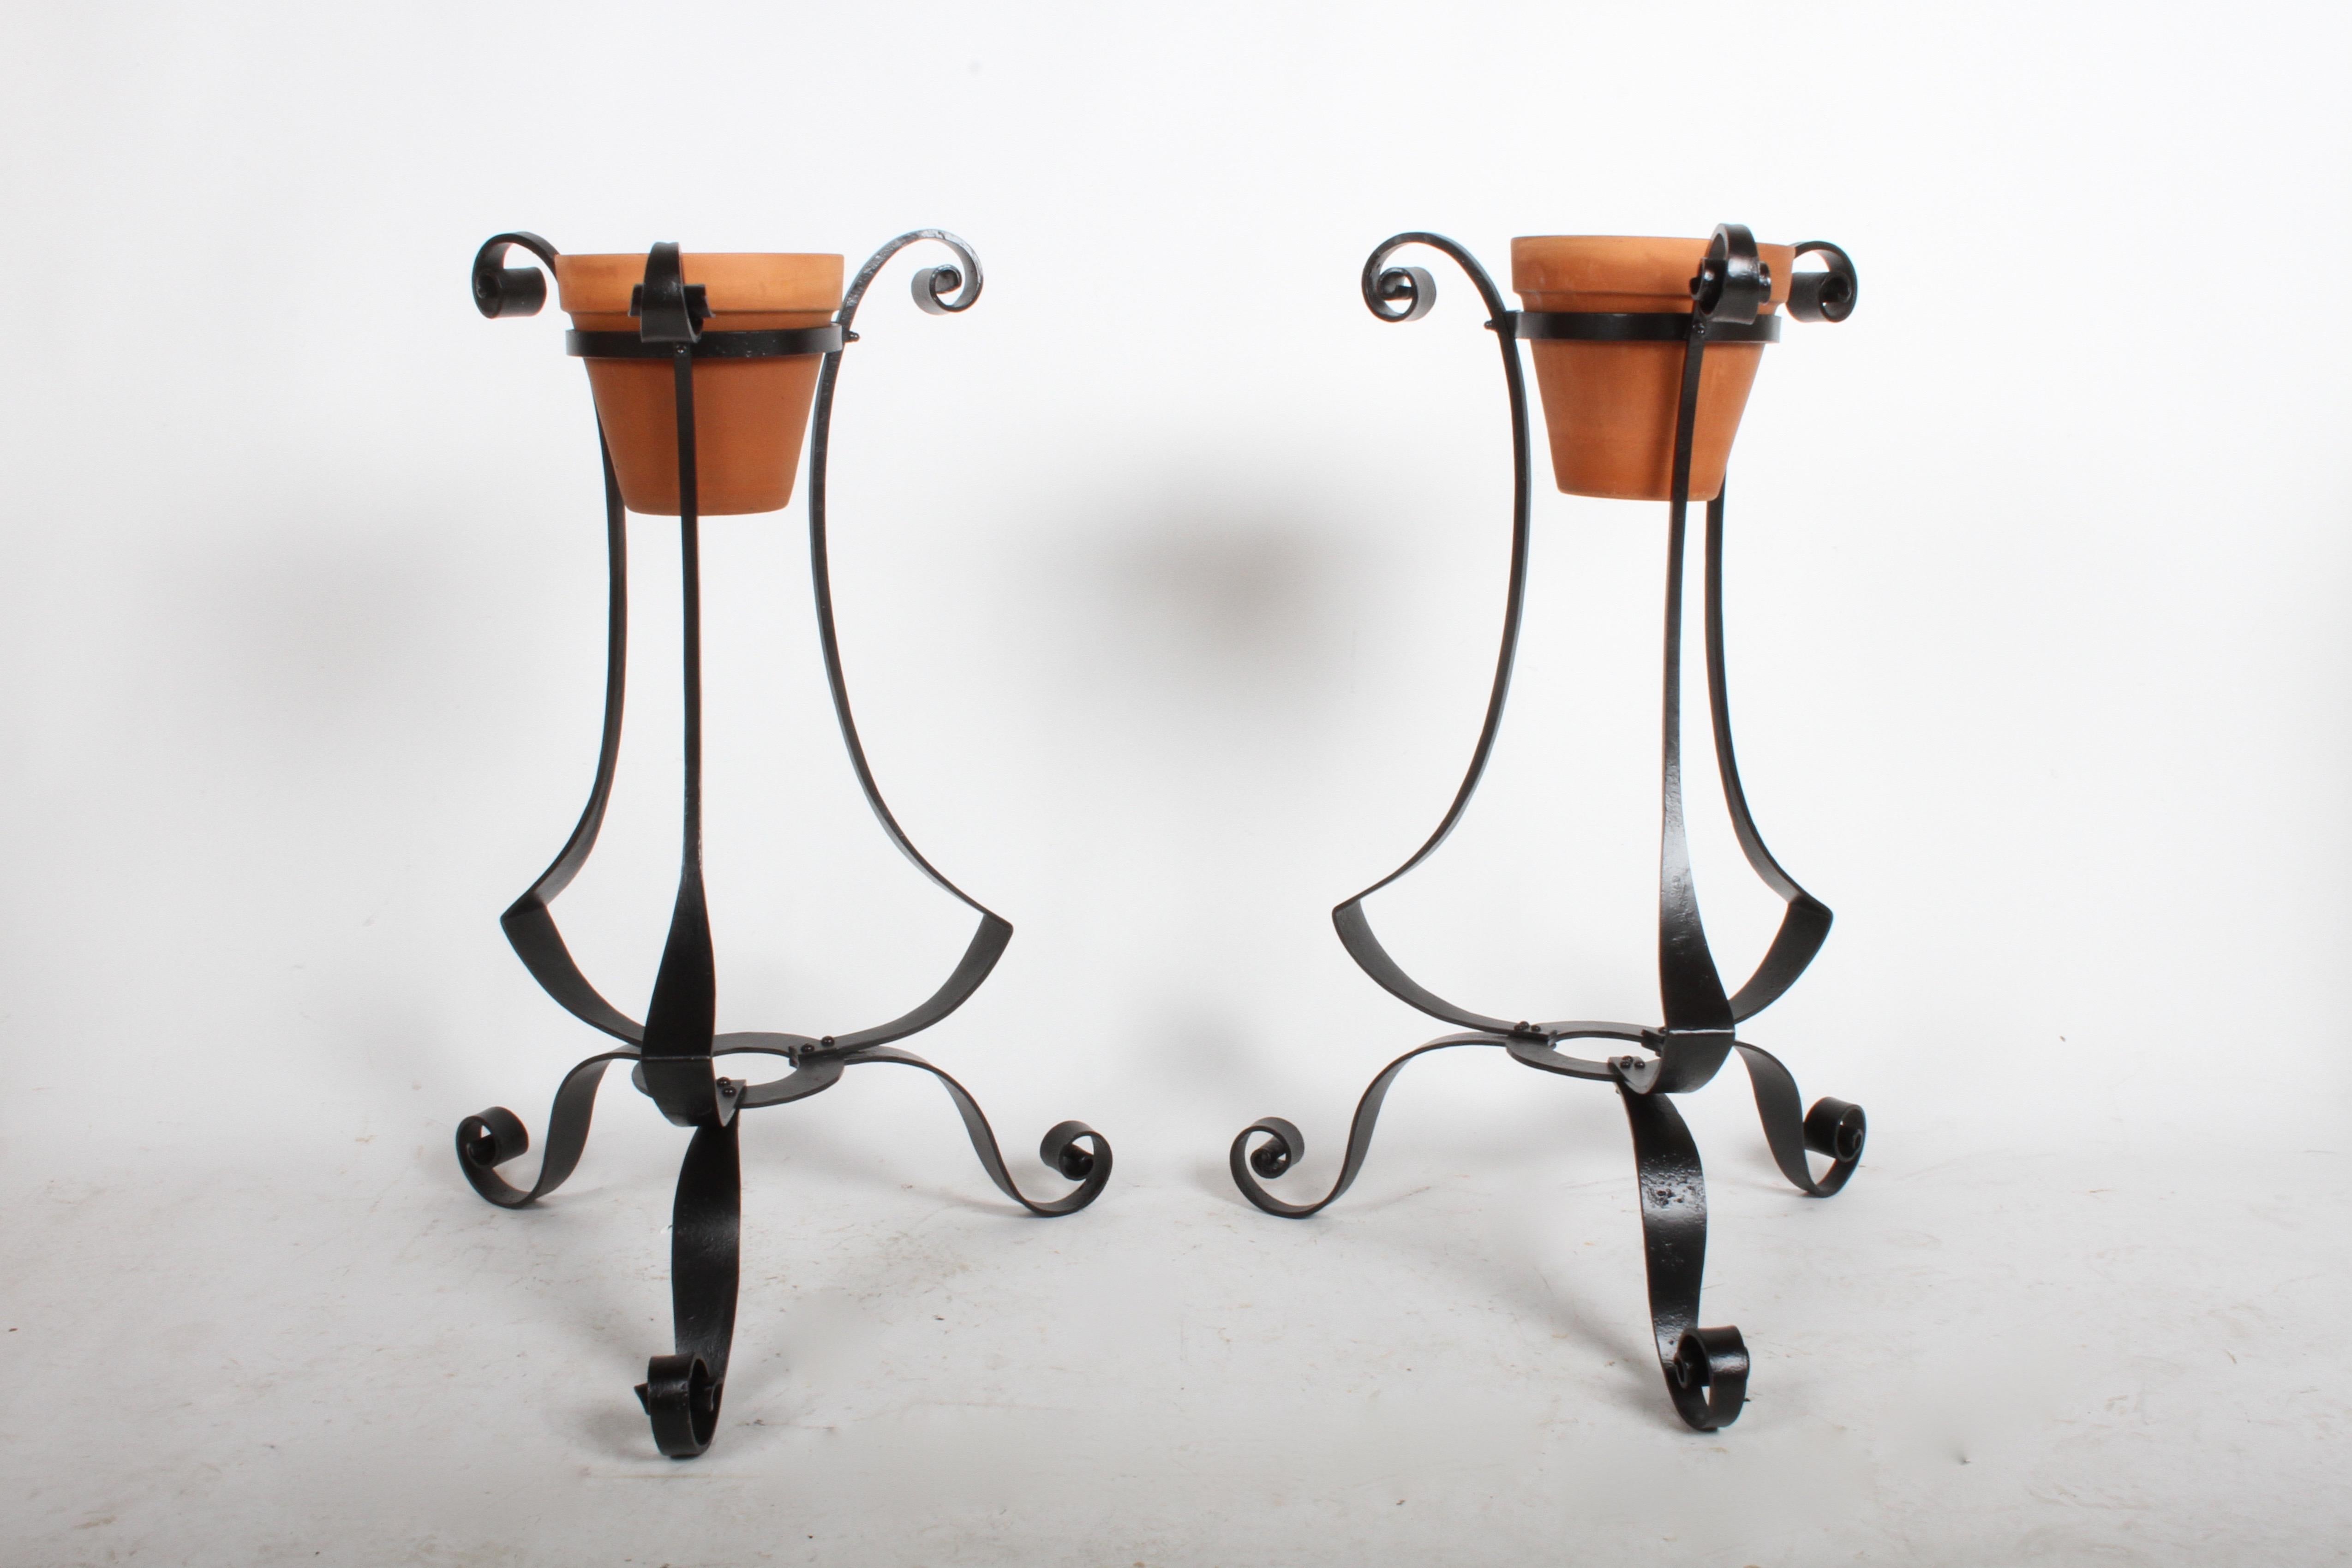 wrought iron planters for sale